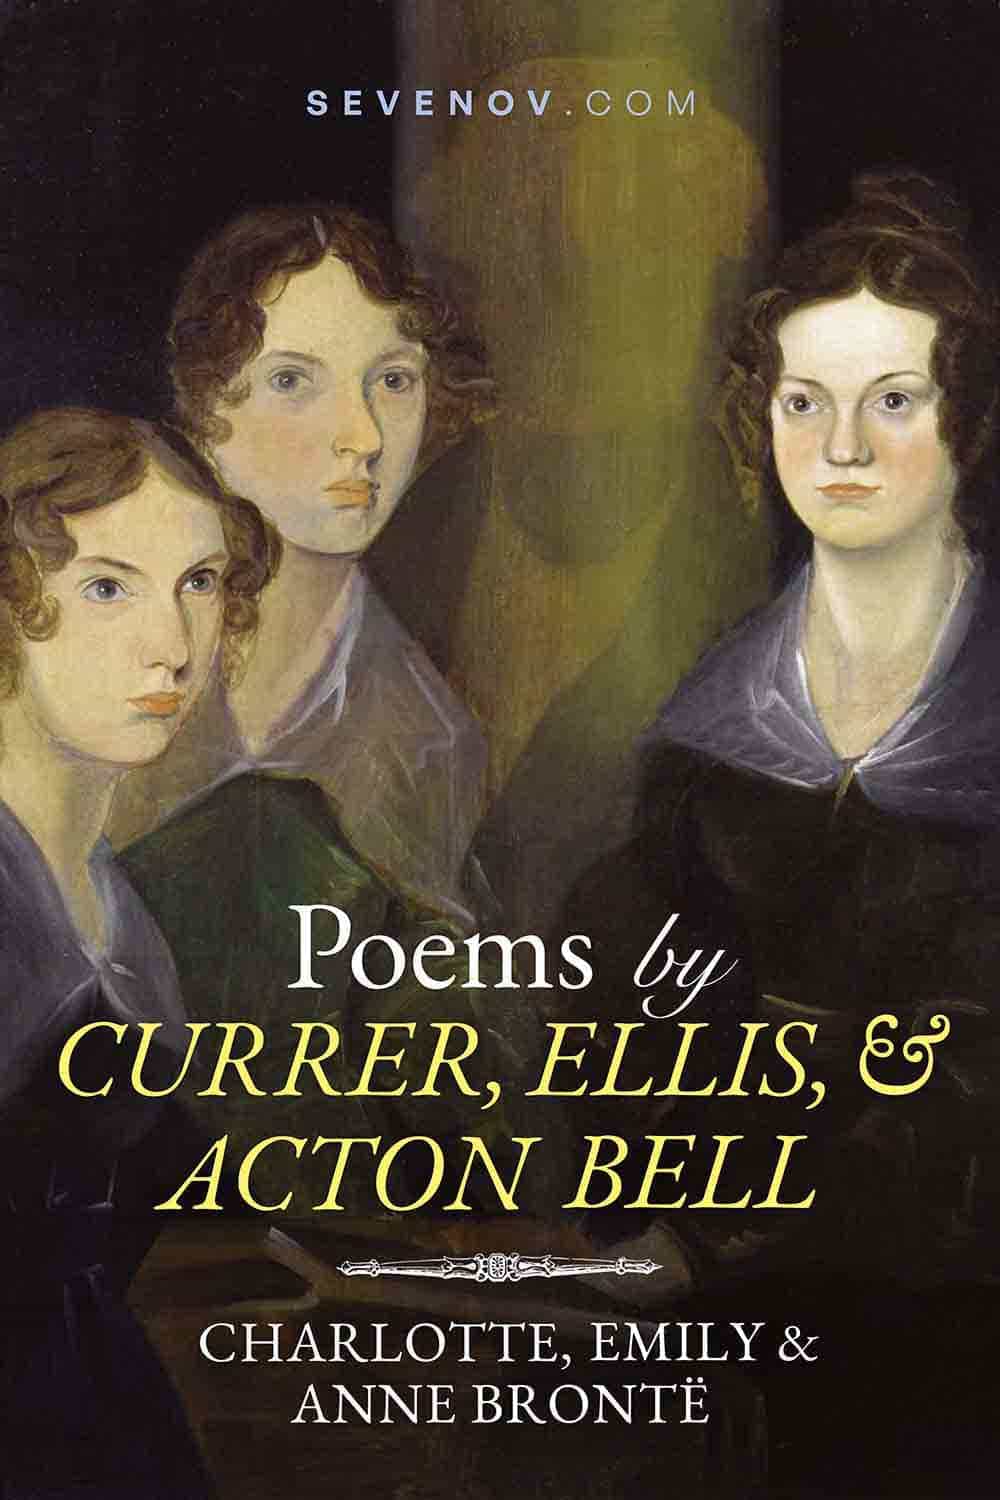 https://pagevio.com/wp-content/uploads/2022/11/poems-by-currer-ellis-and-acton-bell-20220621.jpg